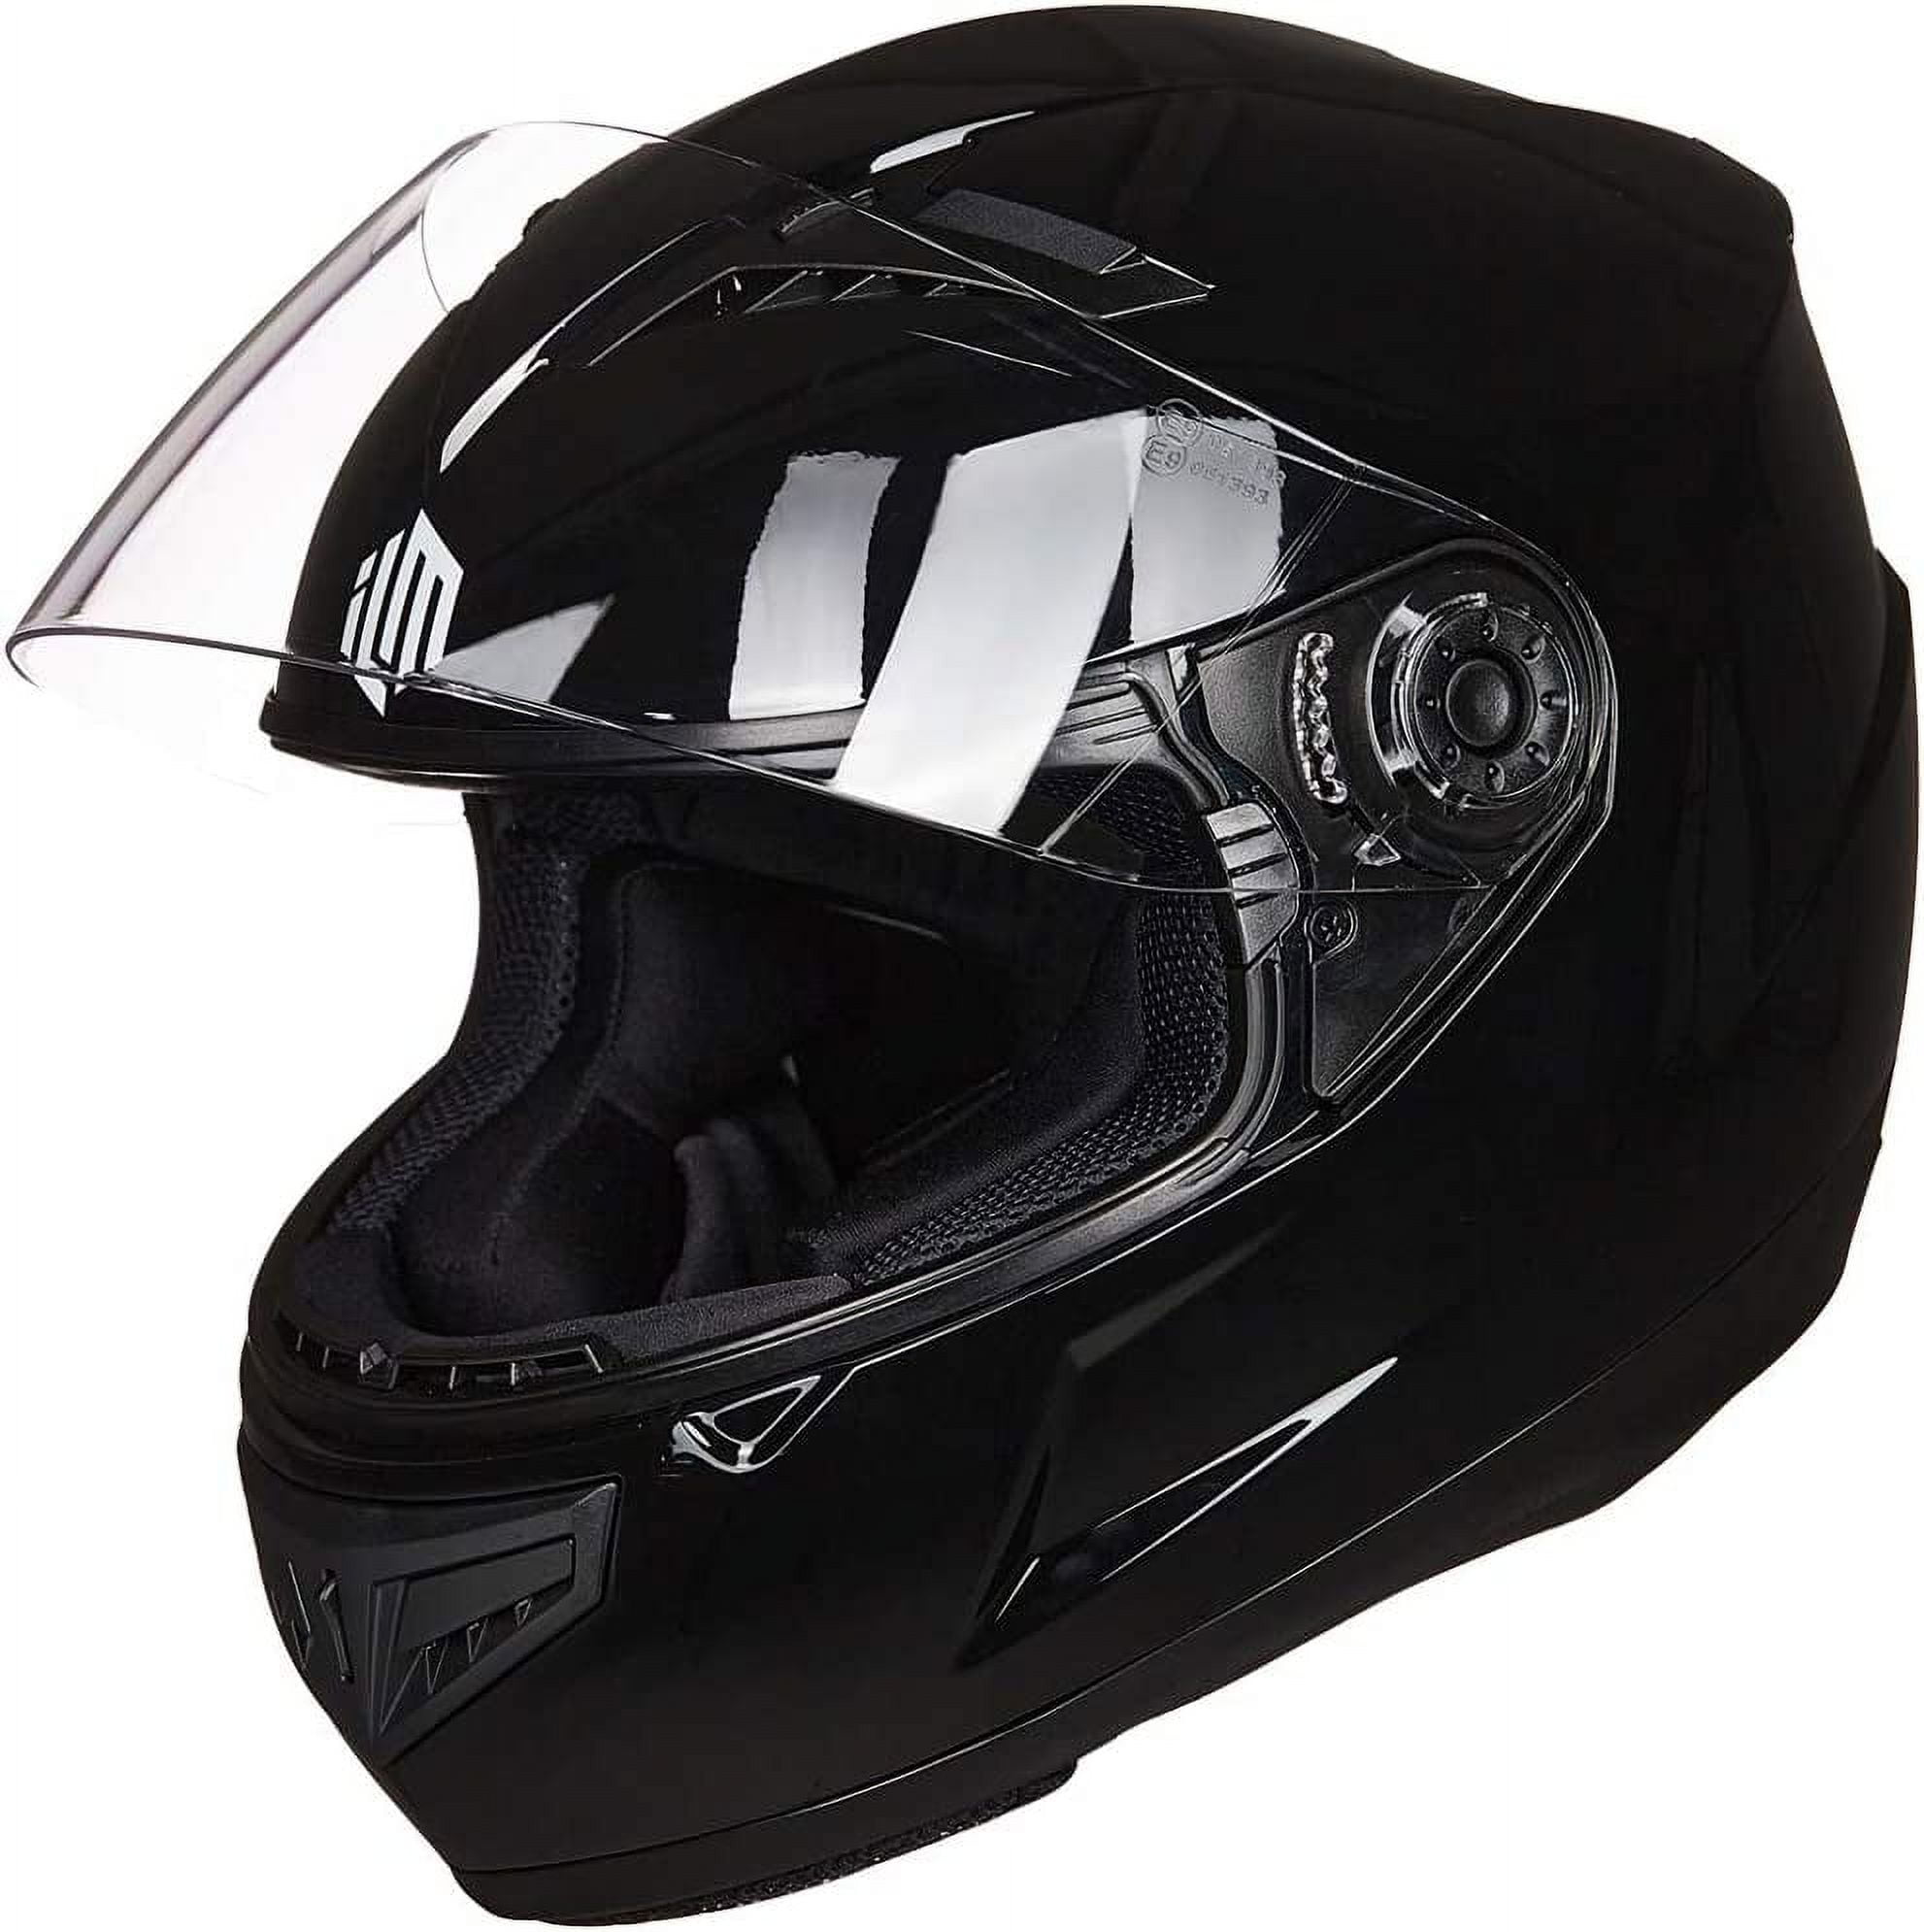 Full Face Motorcycle Helmets Nearby For Youth And Kids Ideal For Motocross, Off  Road Riding, Street Biking, And ATV Activities From Qianxunya, $73.95